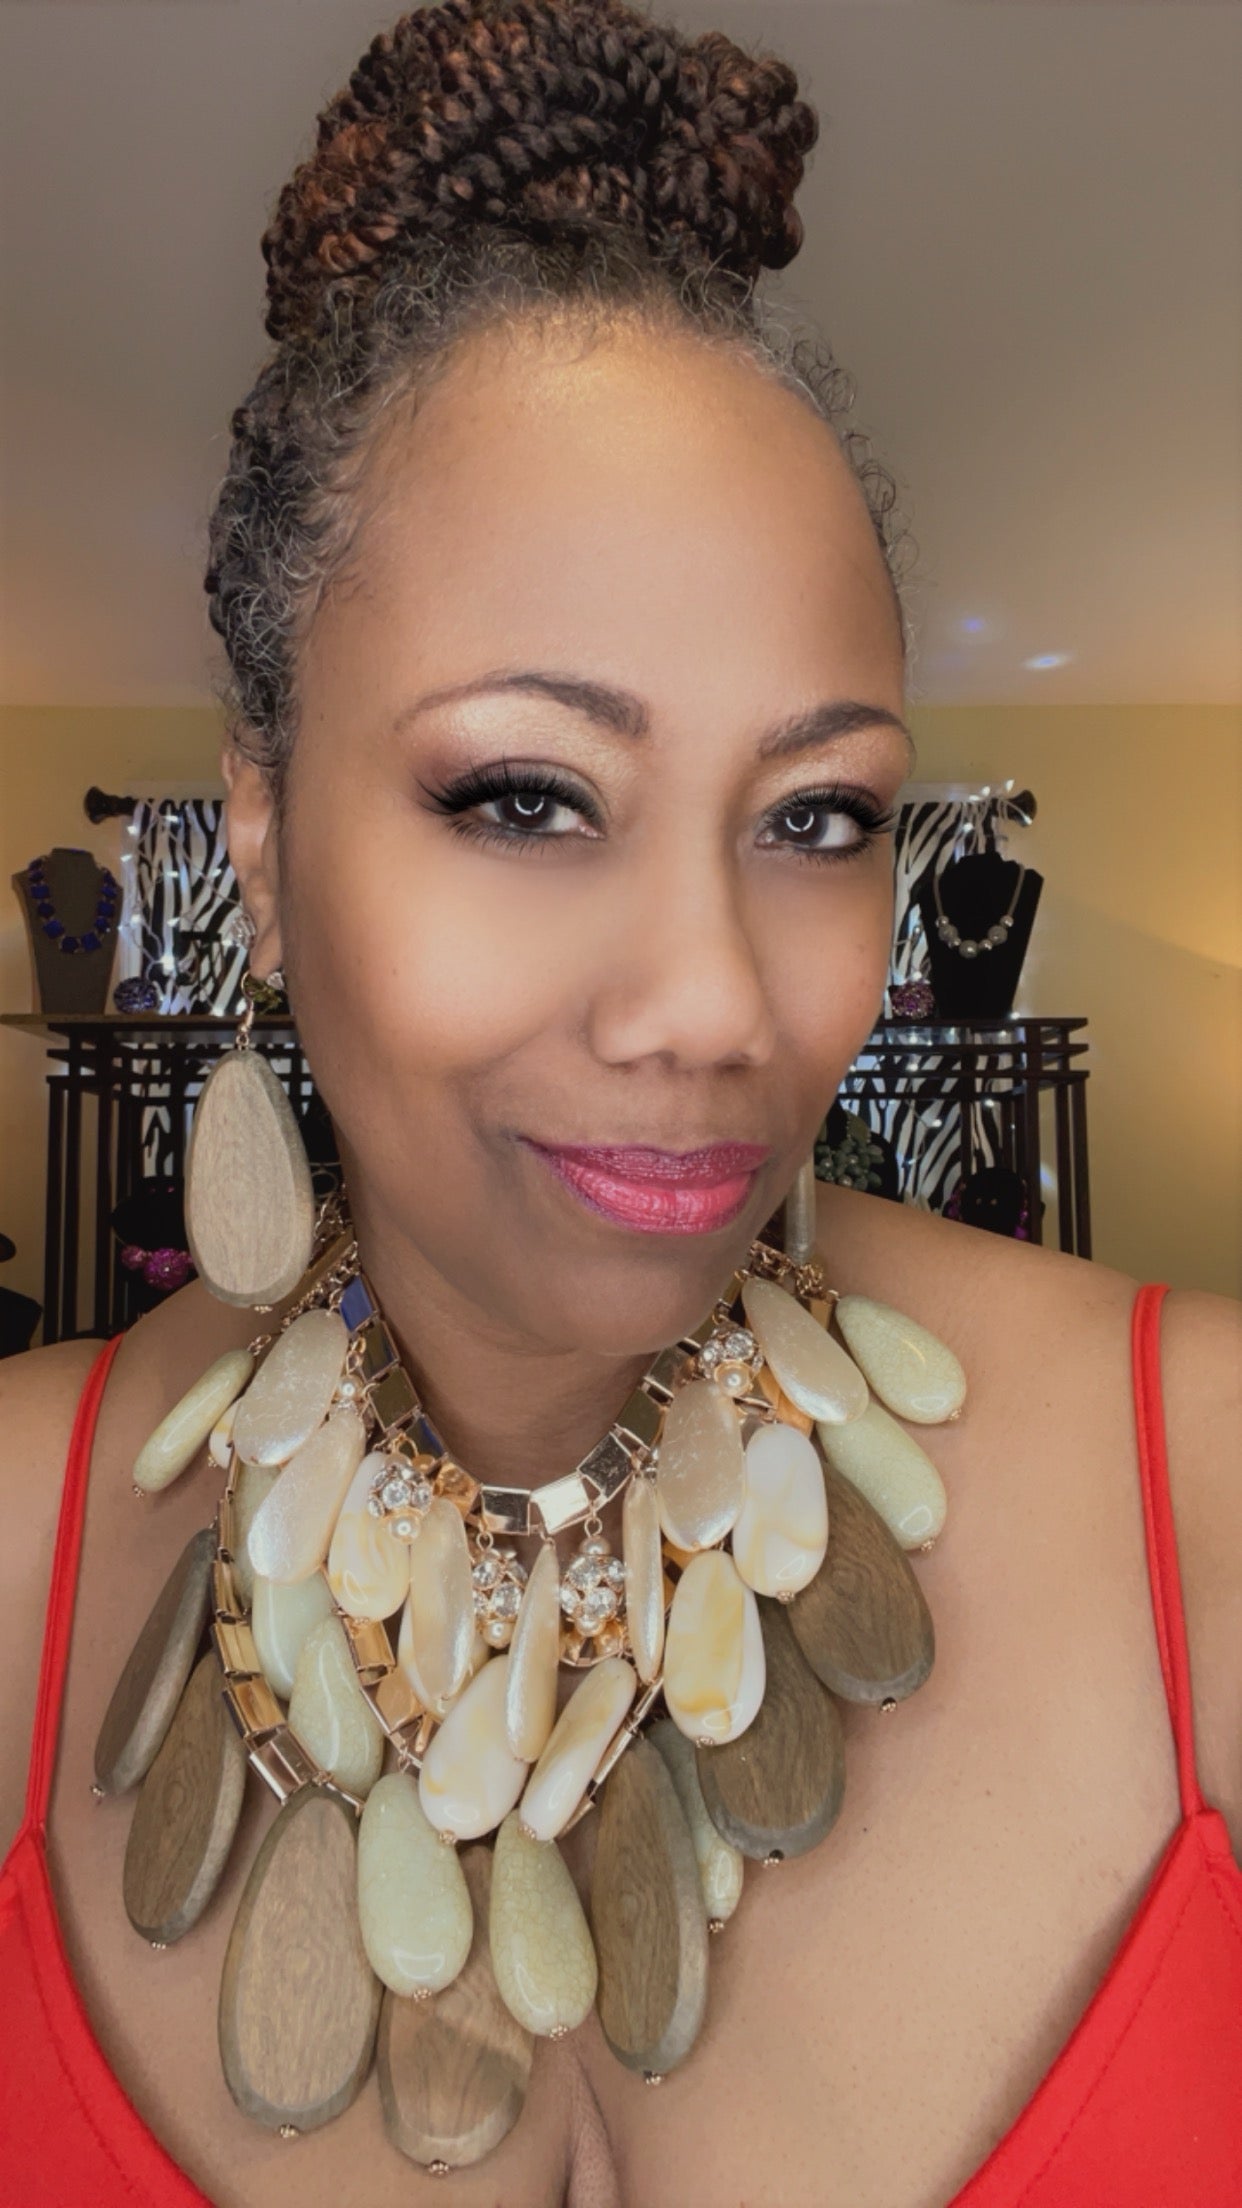 “CHARMING” CHUNKY AGATE STONE AND WOOD STATEMENT NECKLACE SET